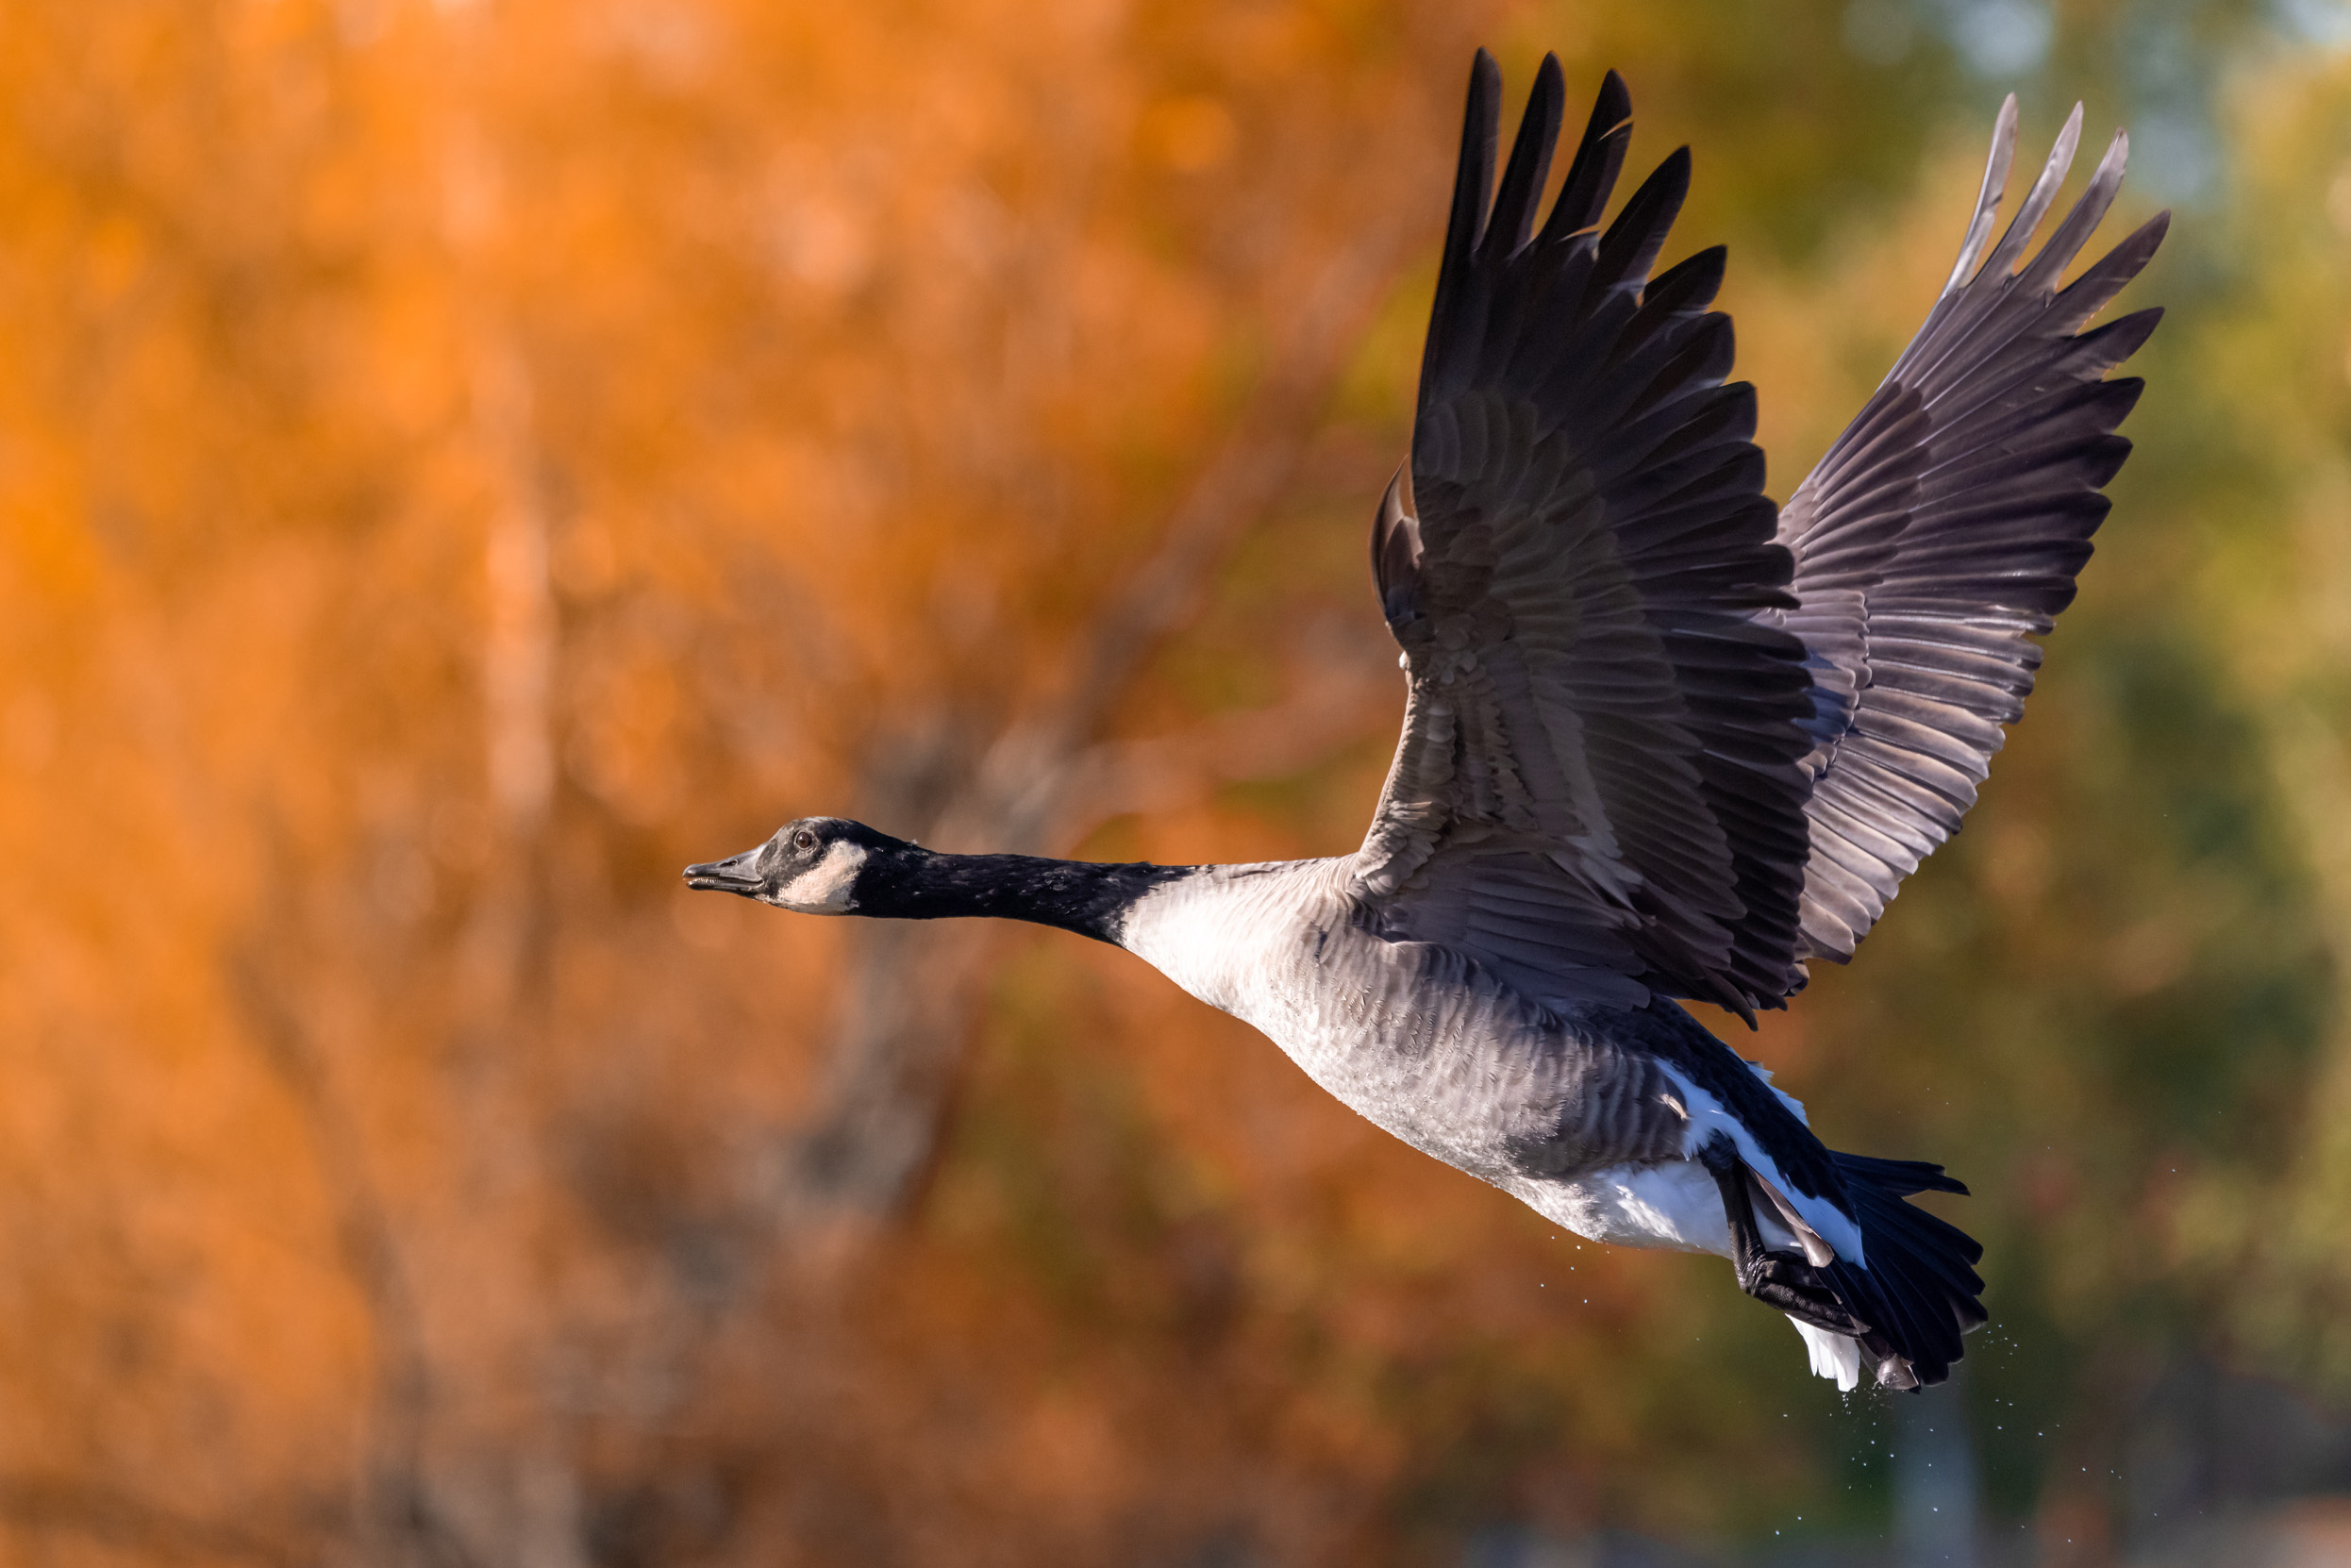 A Canadian Goose in mid flight with an autumnal background.